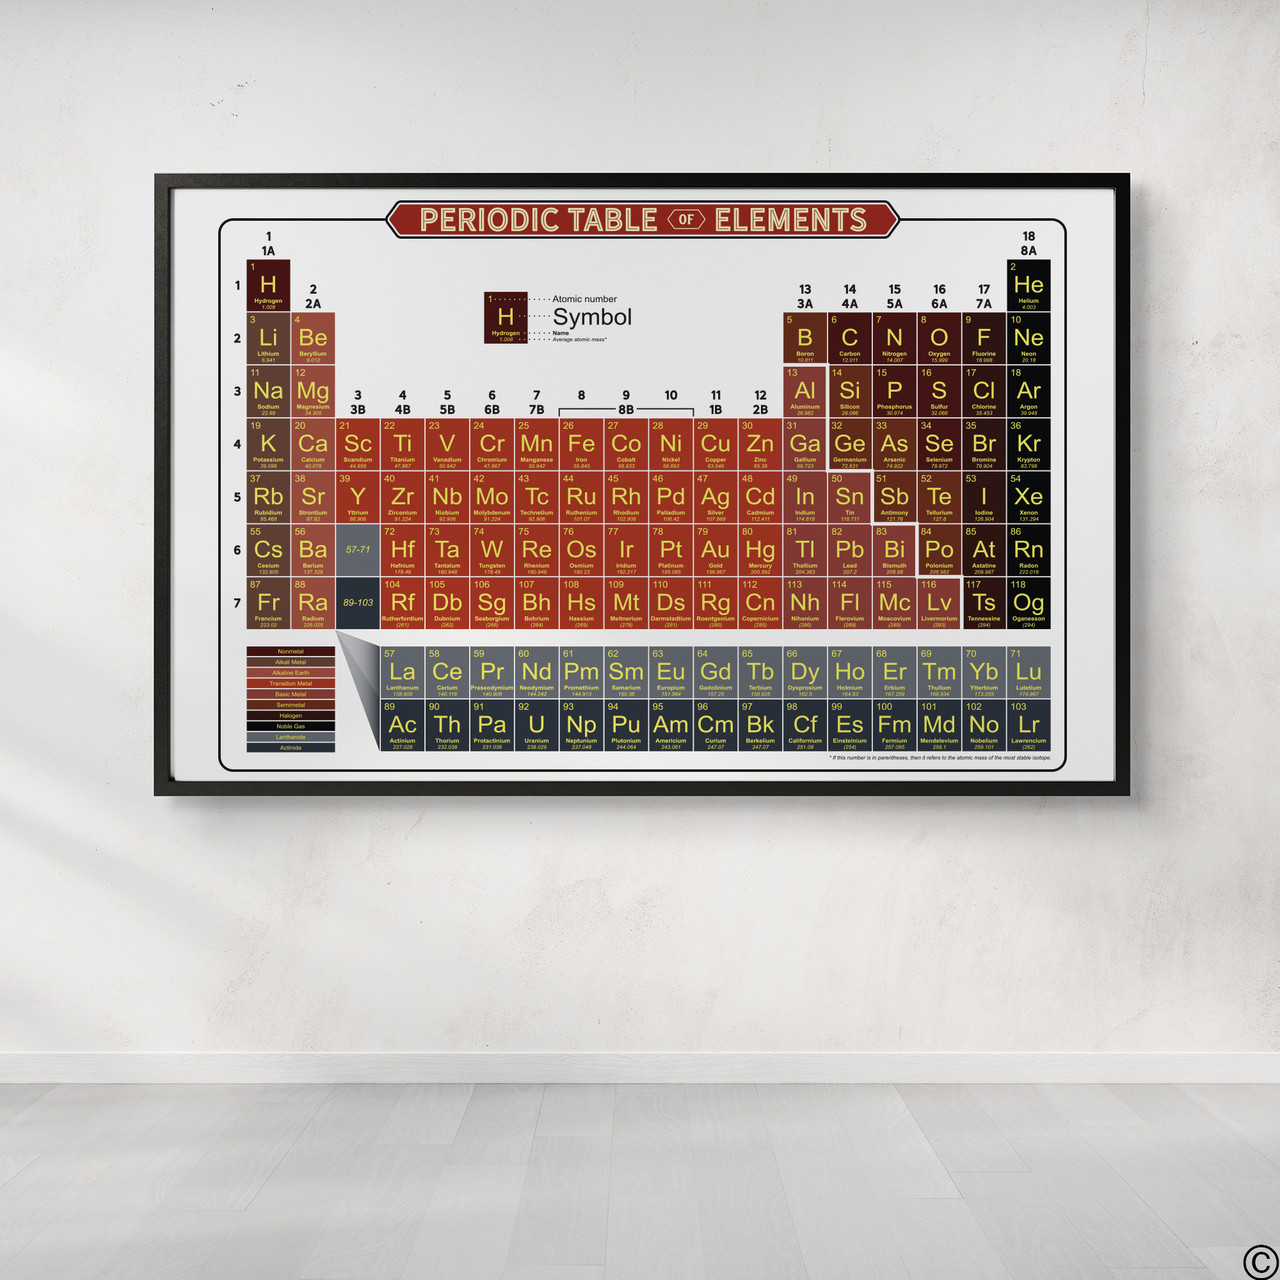 High quality print of the Periodic Table of Elements in a Volcano color theme. Pick from 3 paper types and many sizes including standard frame sizes. Also available as a removable wall decal.